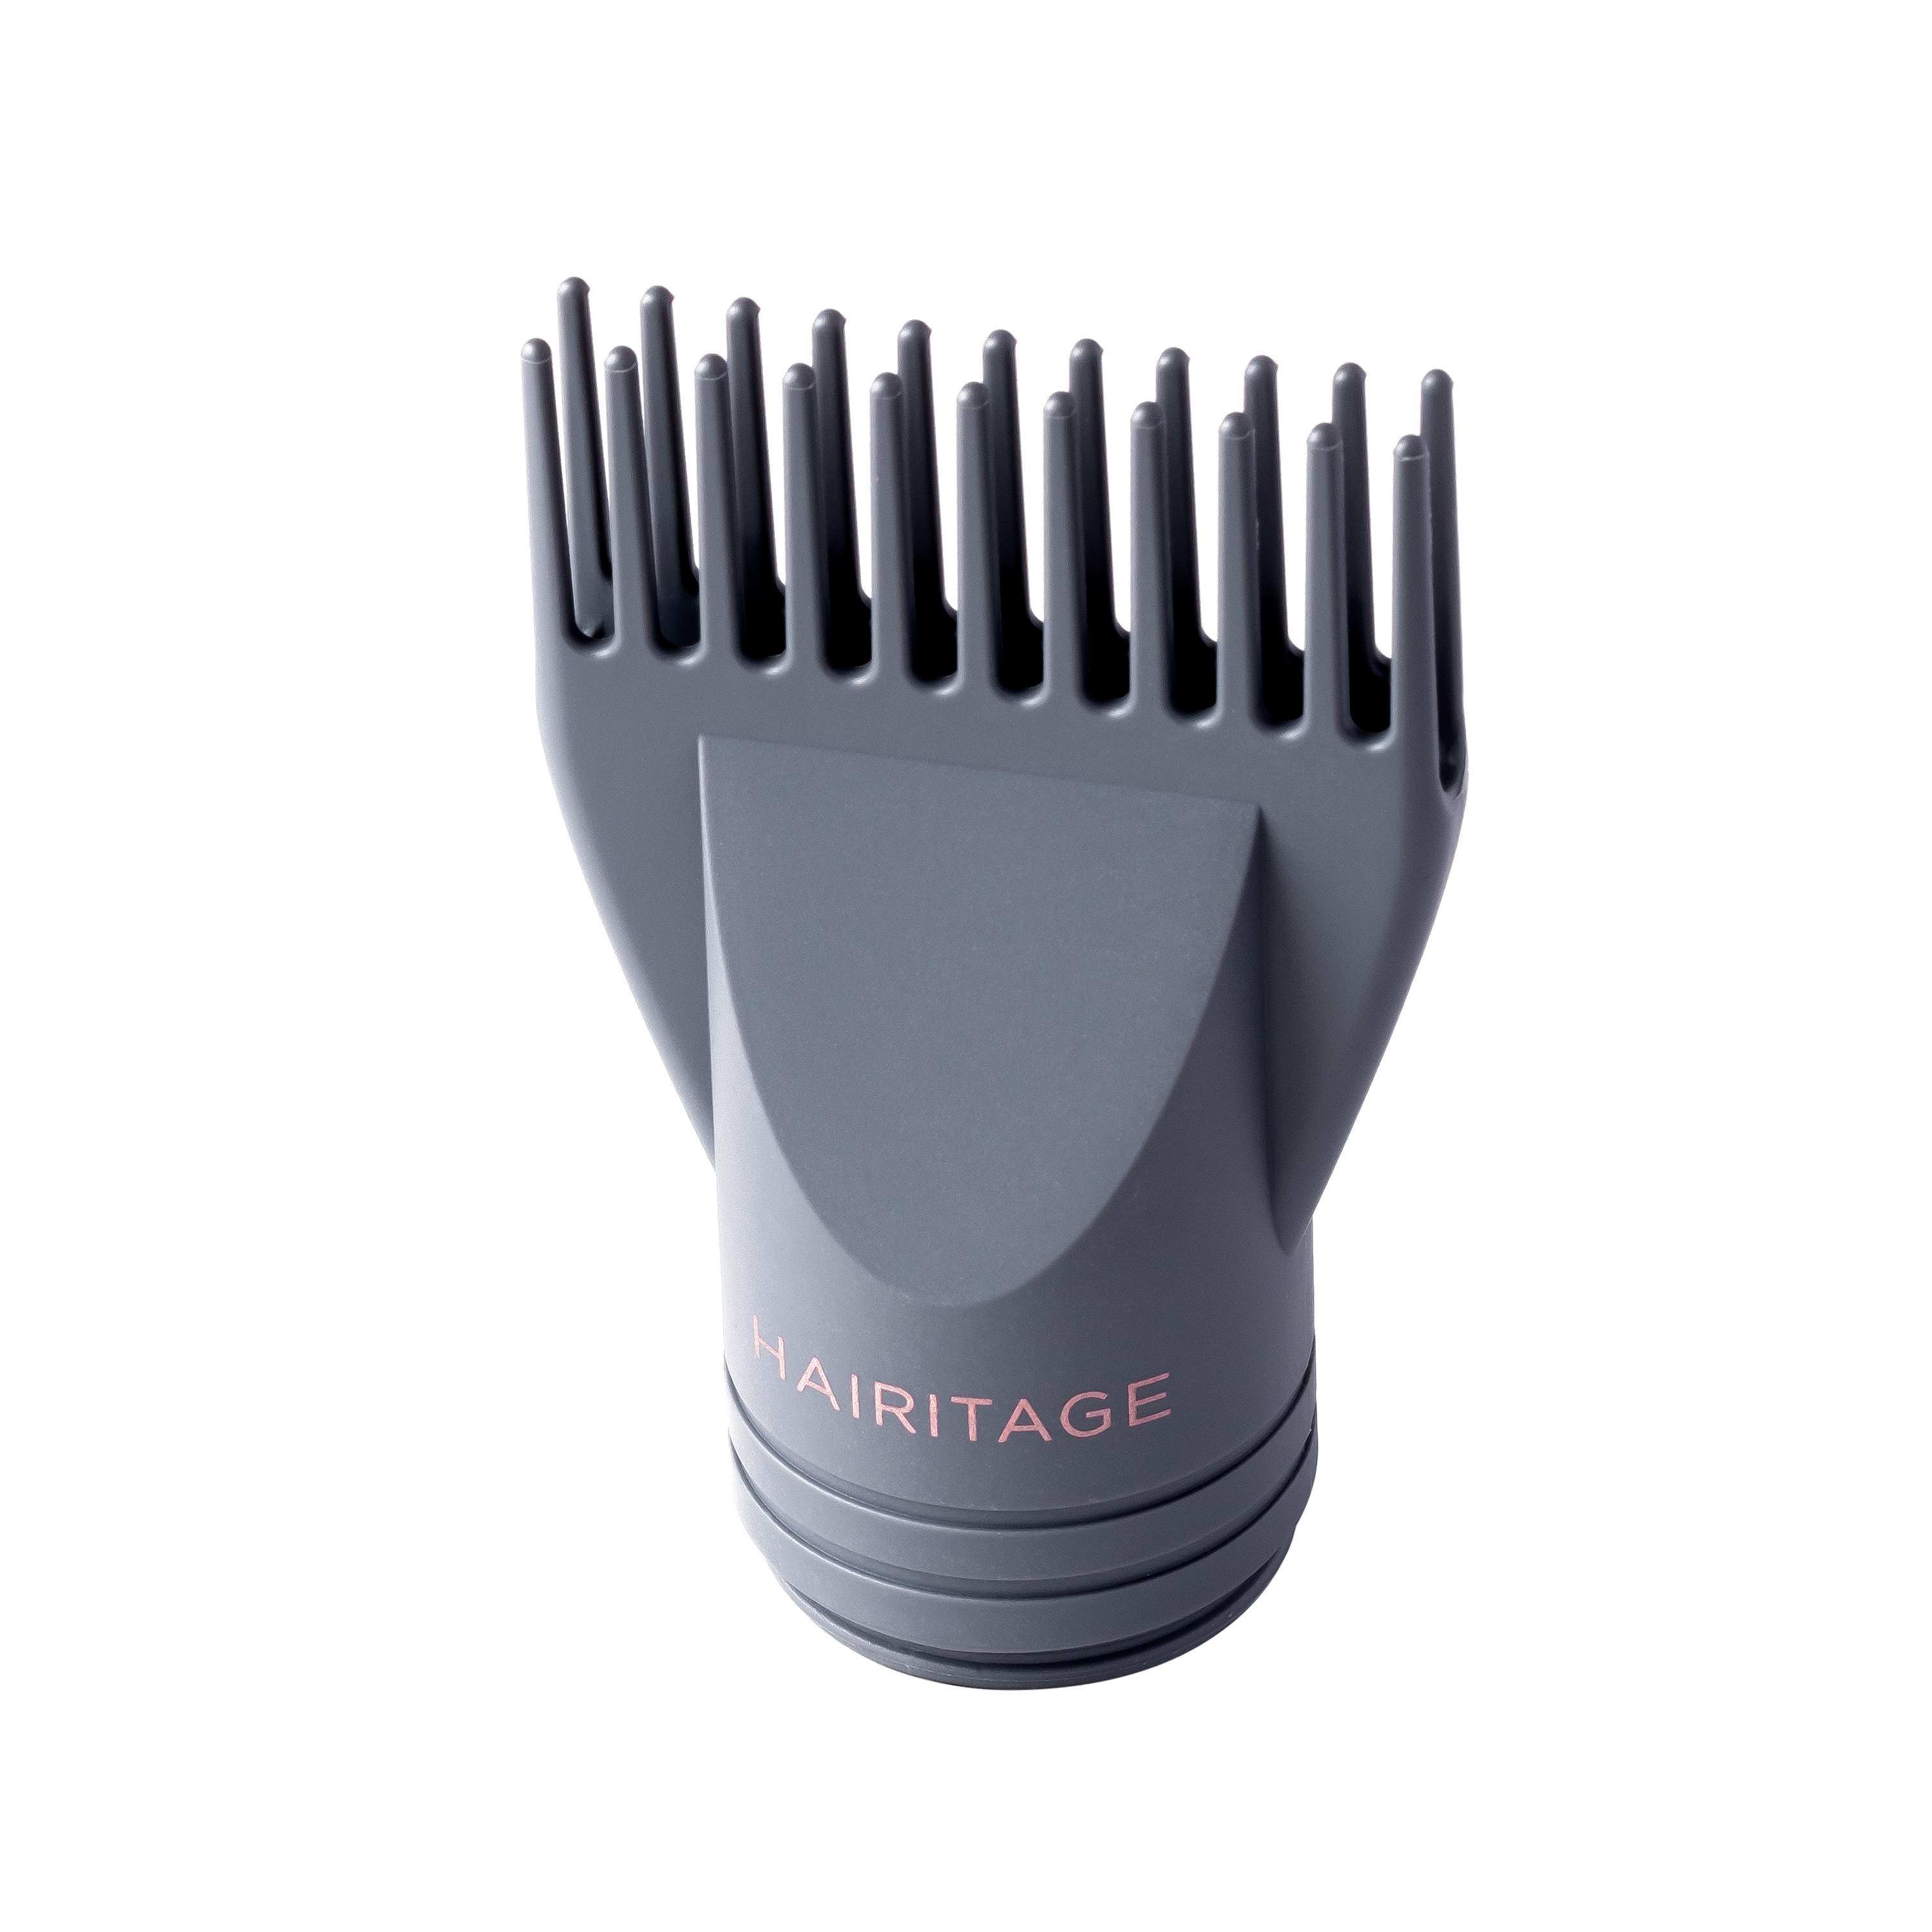 3pcsset Hair Dryer Comb Attachment Professional Hair Dryer Comb Nozzle  Hairdressing Styling Salon Tool For Barber Shop black  Fruugo IN